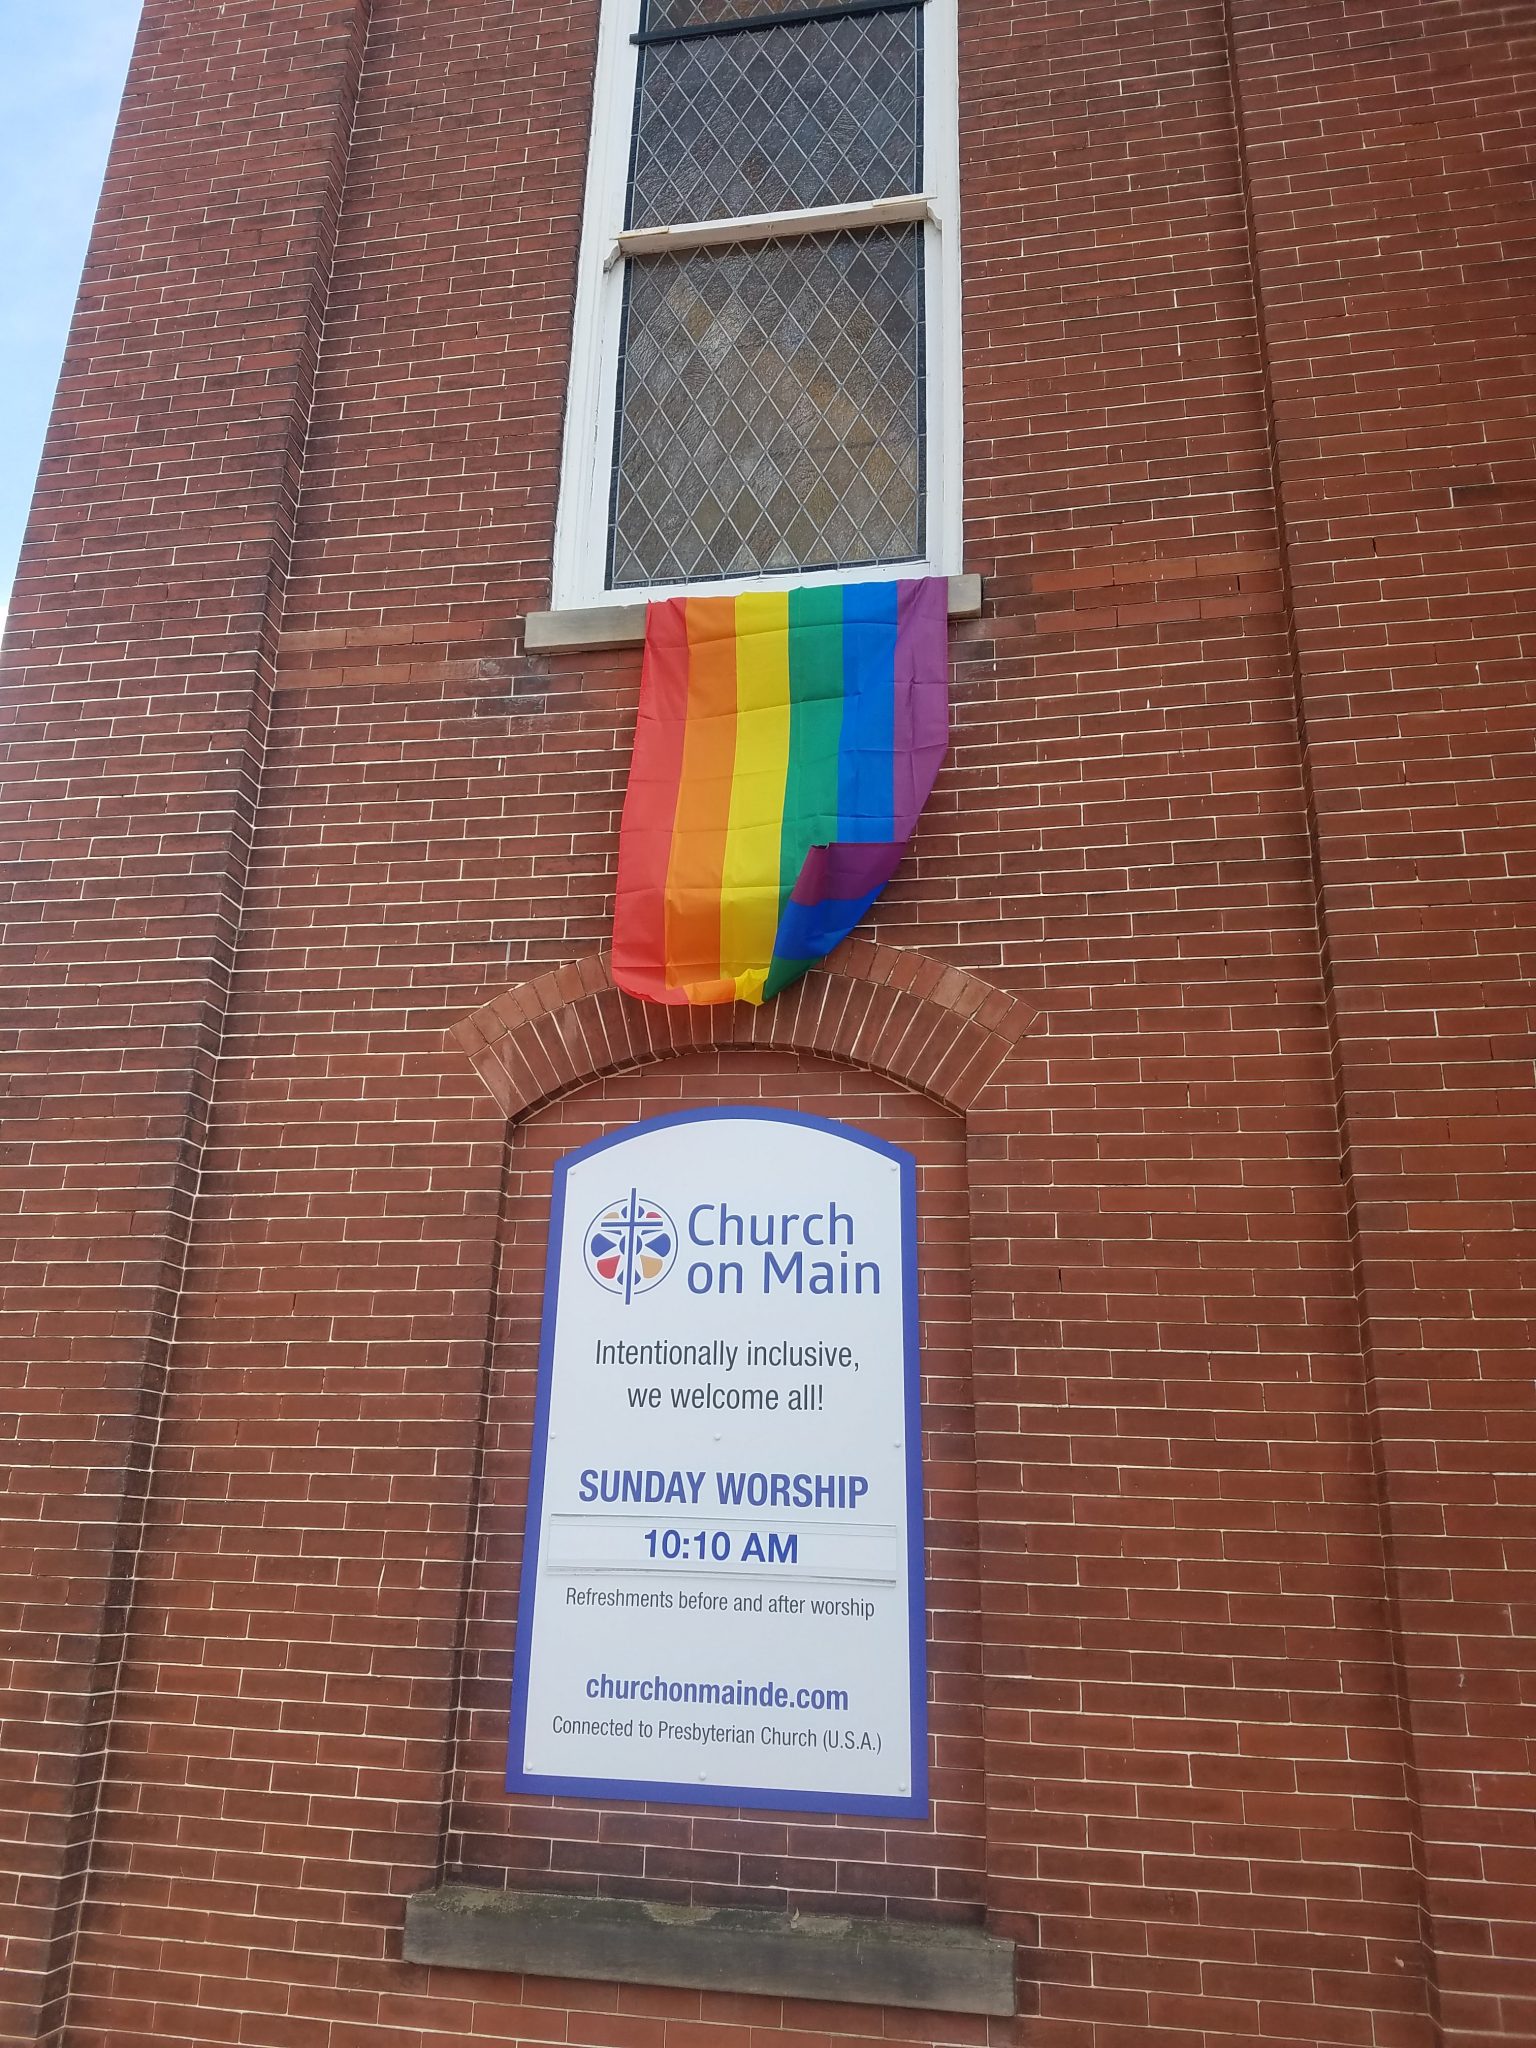 A picture of the front of the church. A LGBTQ pride flag is hanging from a window. A Sign on the front of the building states "Church on Main, Intentionally Includsive, We welcome all. Sunday Worship 10:10AM. Refreshments before and after worship (Outdated on the sign but included here for accuracy.) Churchonmainde.com. Connected to the Presbyterian Church. (U.S.A.)